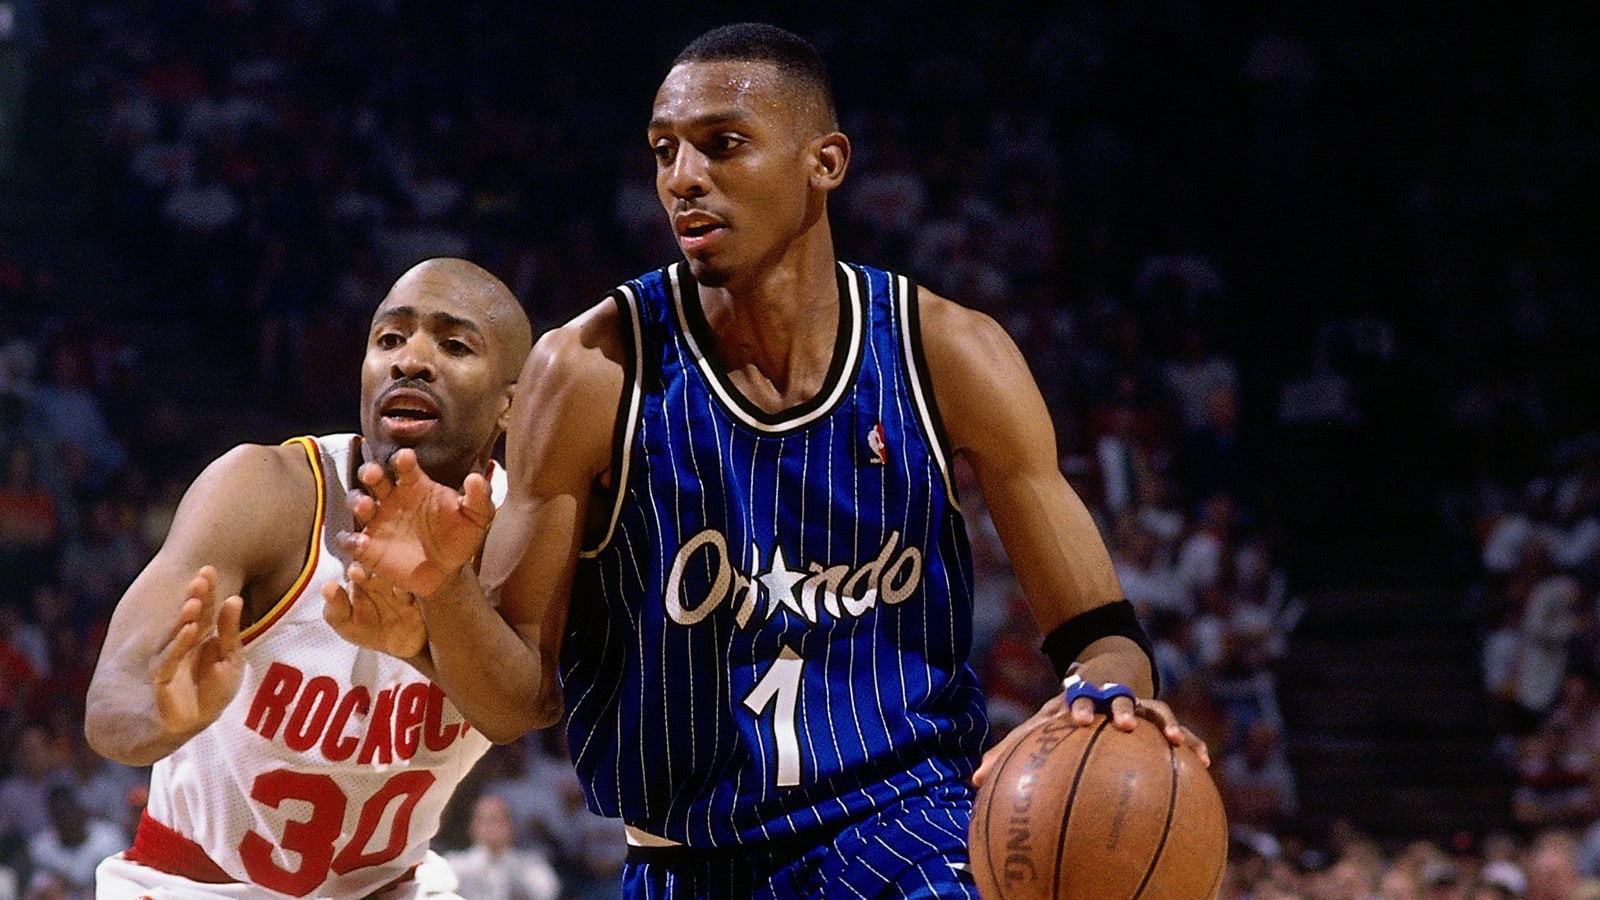 NBA: 50 greatest players who aren't in the Basketball Hall of Fame